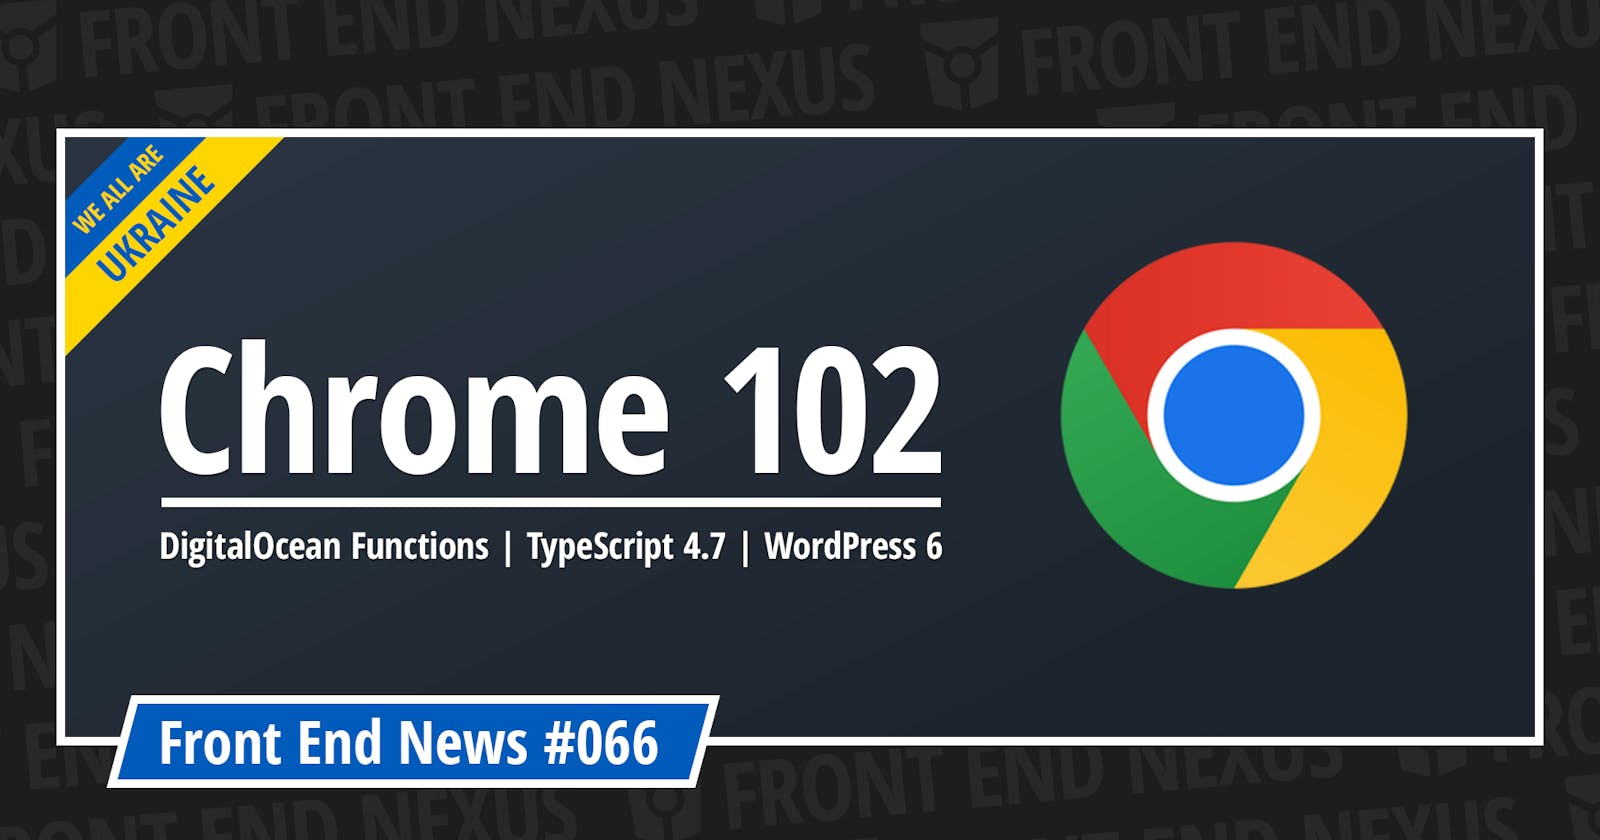 Chrome 102, DigitalOcean Functions, Safari Technology Preview 146, TypeScript 4.7, WordPress 6, and more | Front End News #066